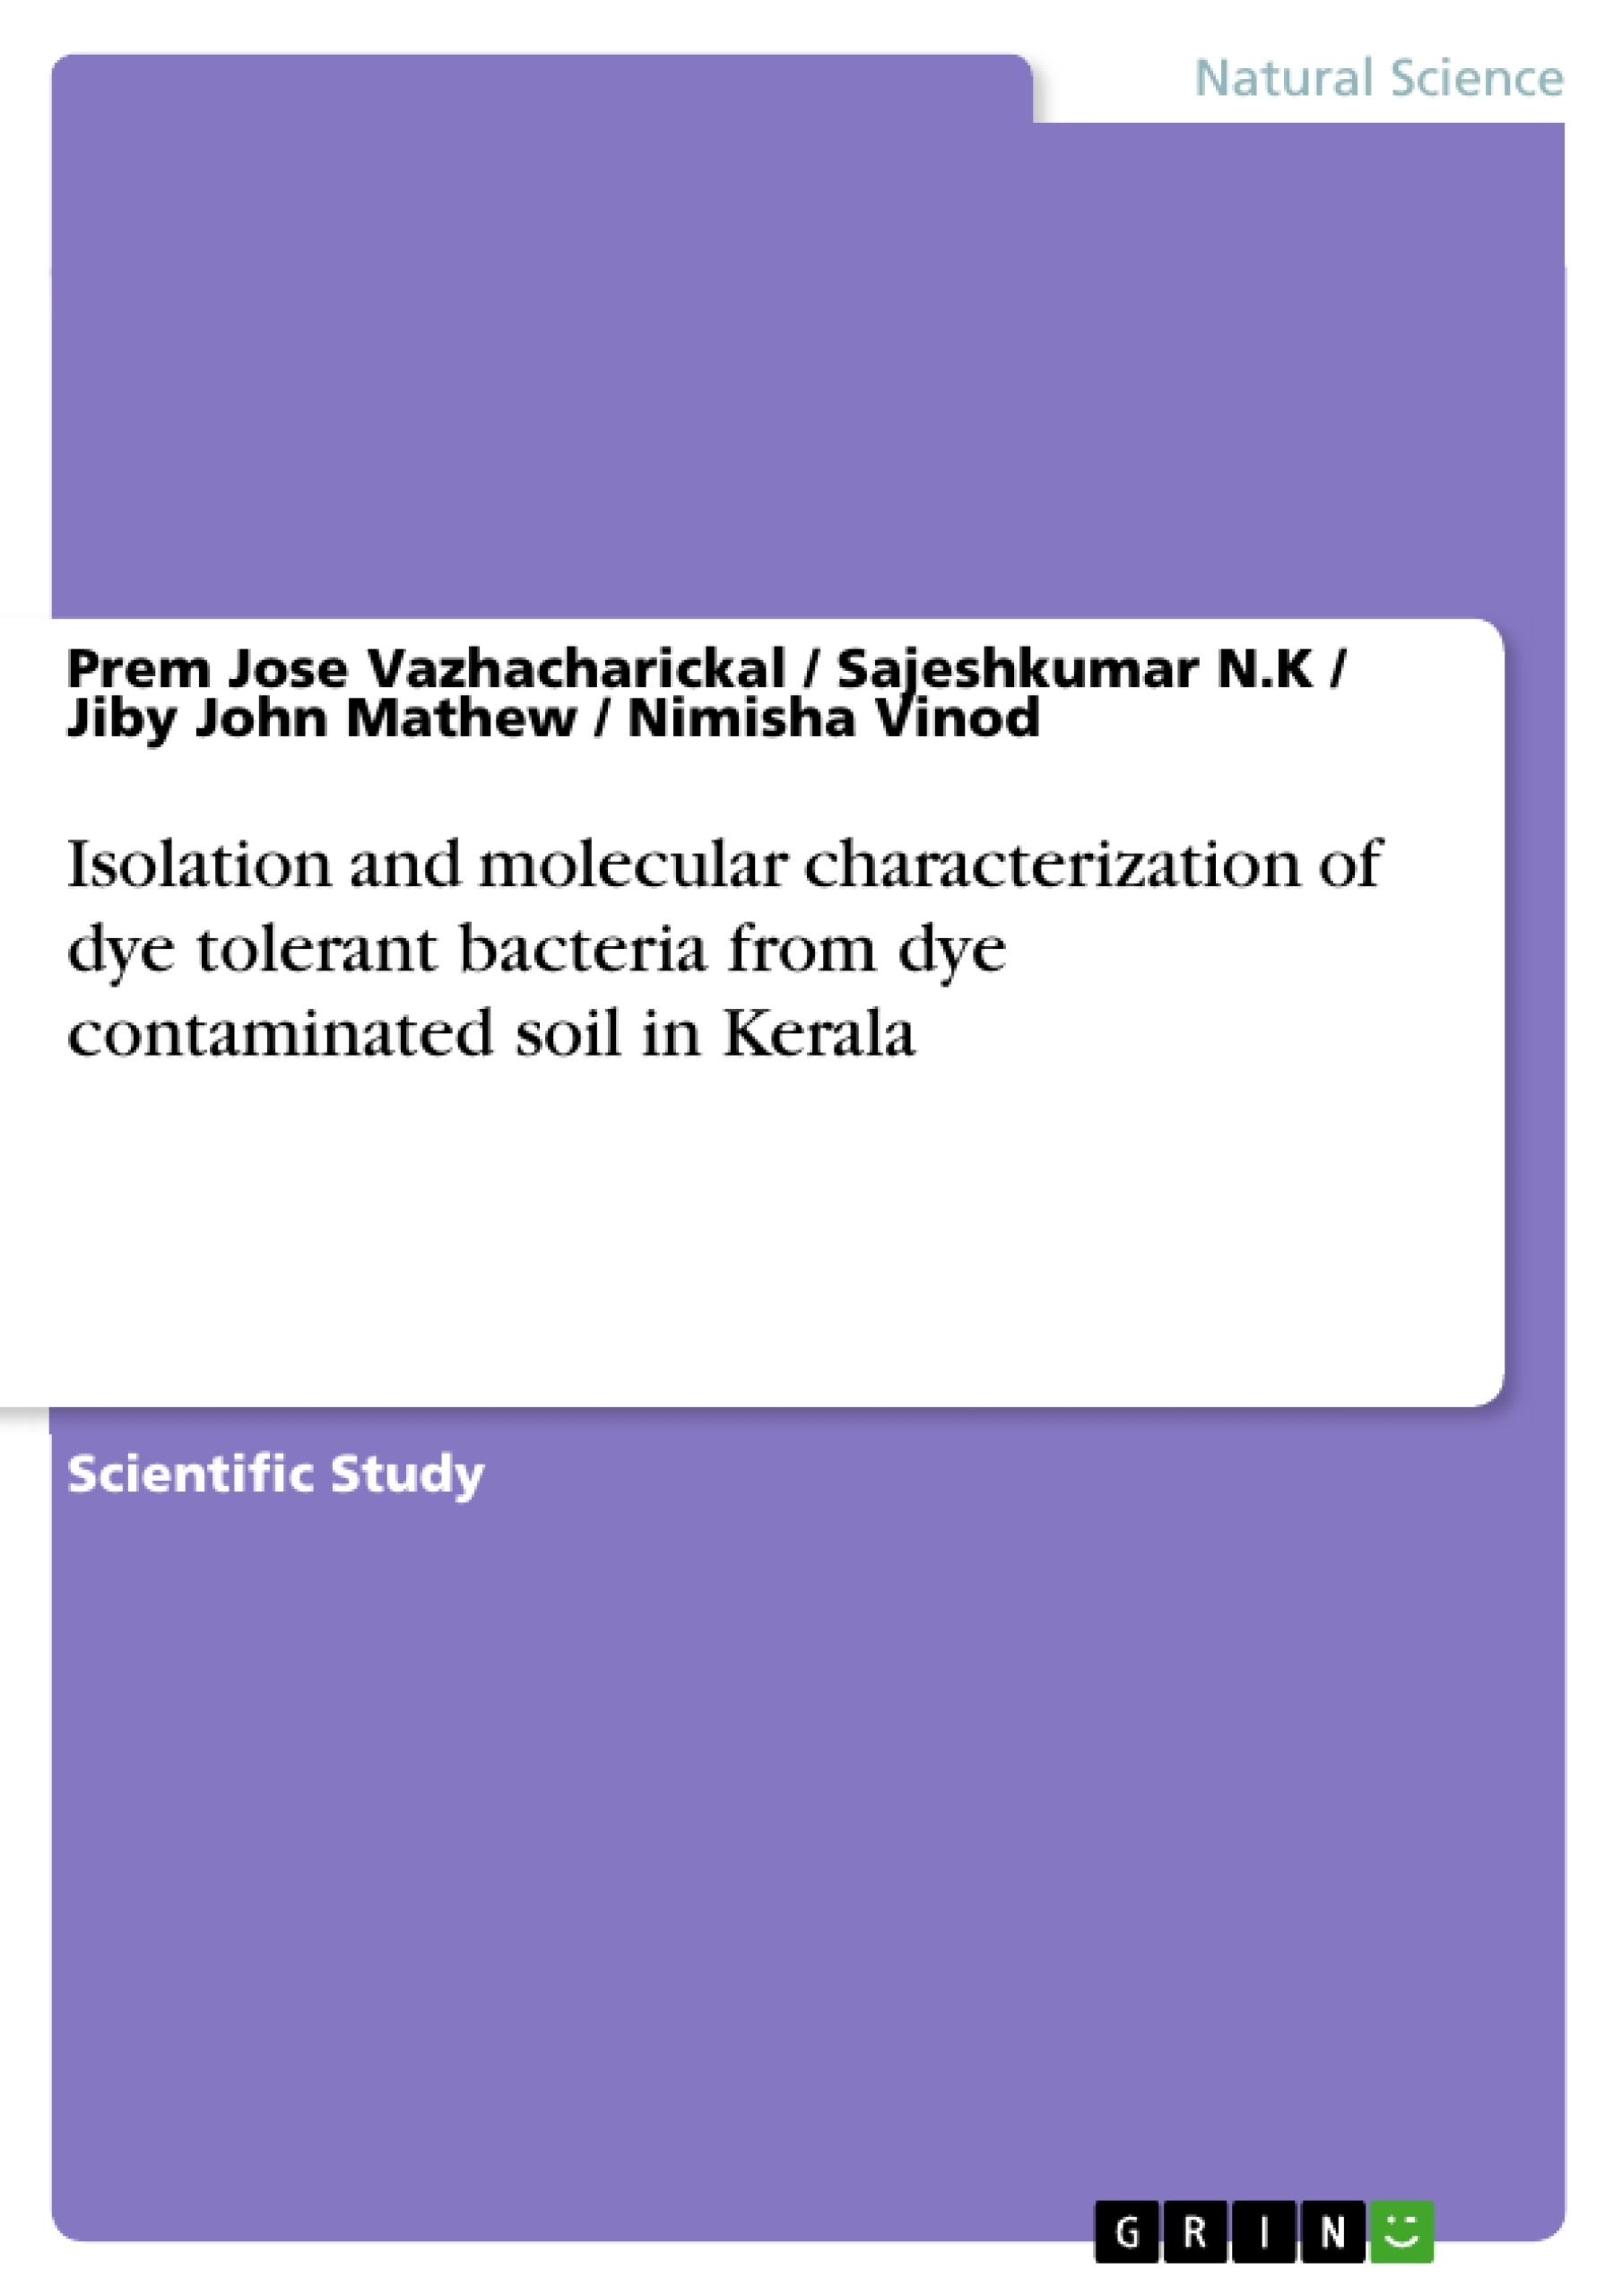 Titel: Isolation and molecular characterization of dye tolerant bacteria from dye contaminated soil in Kerala